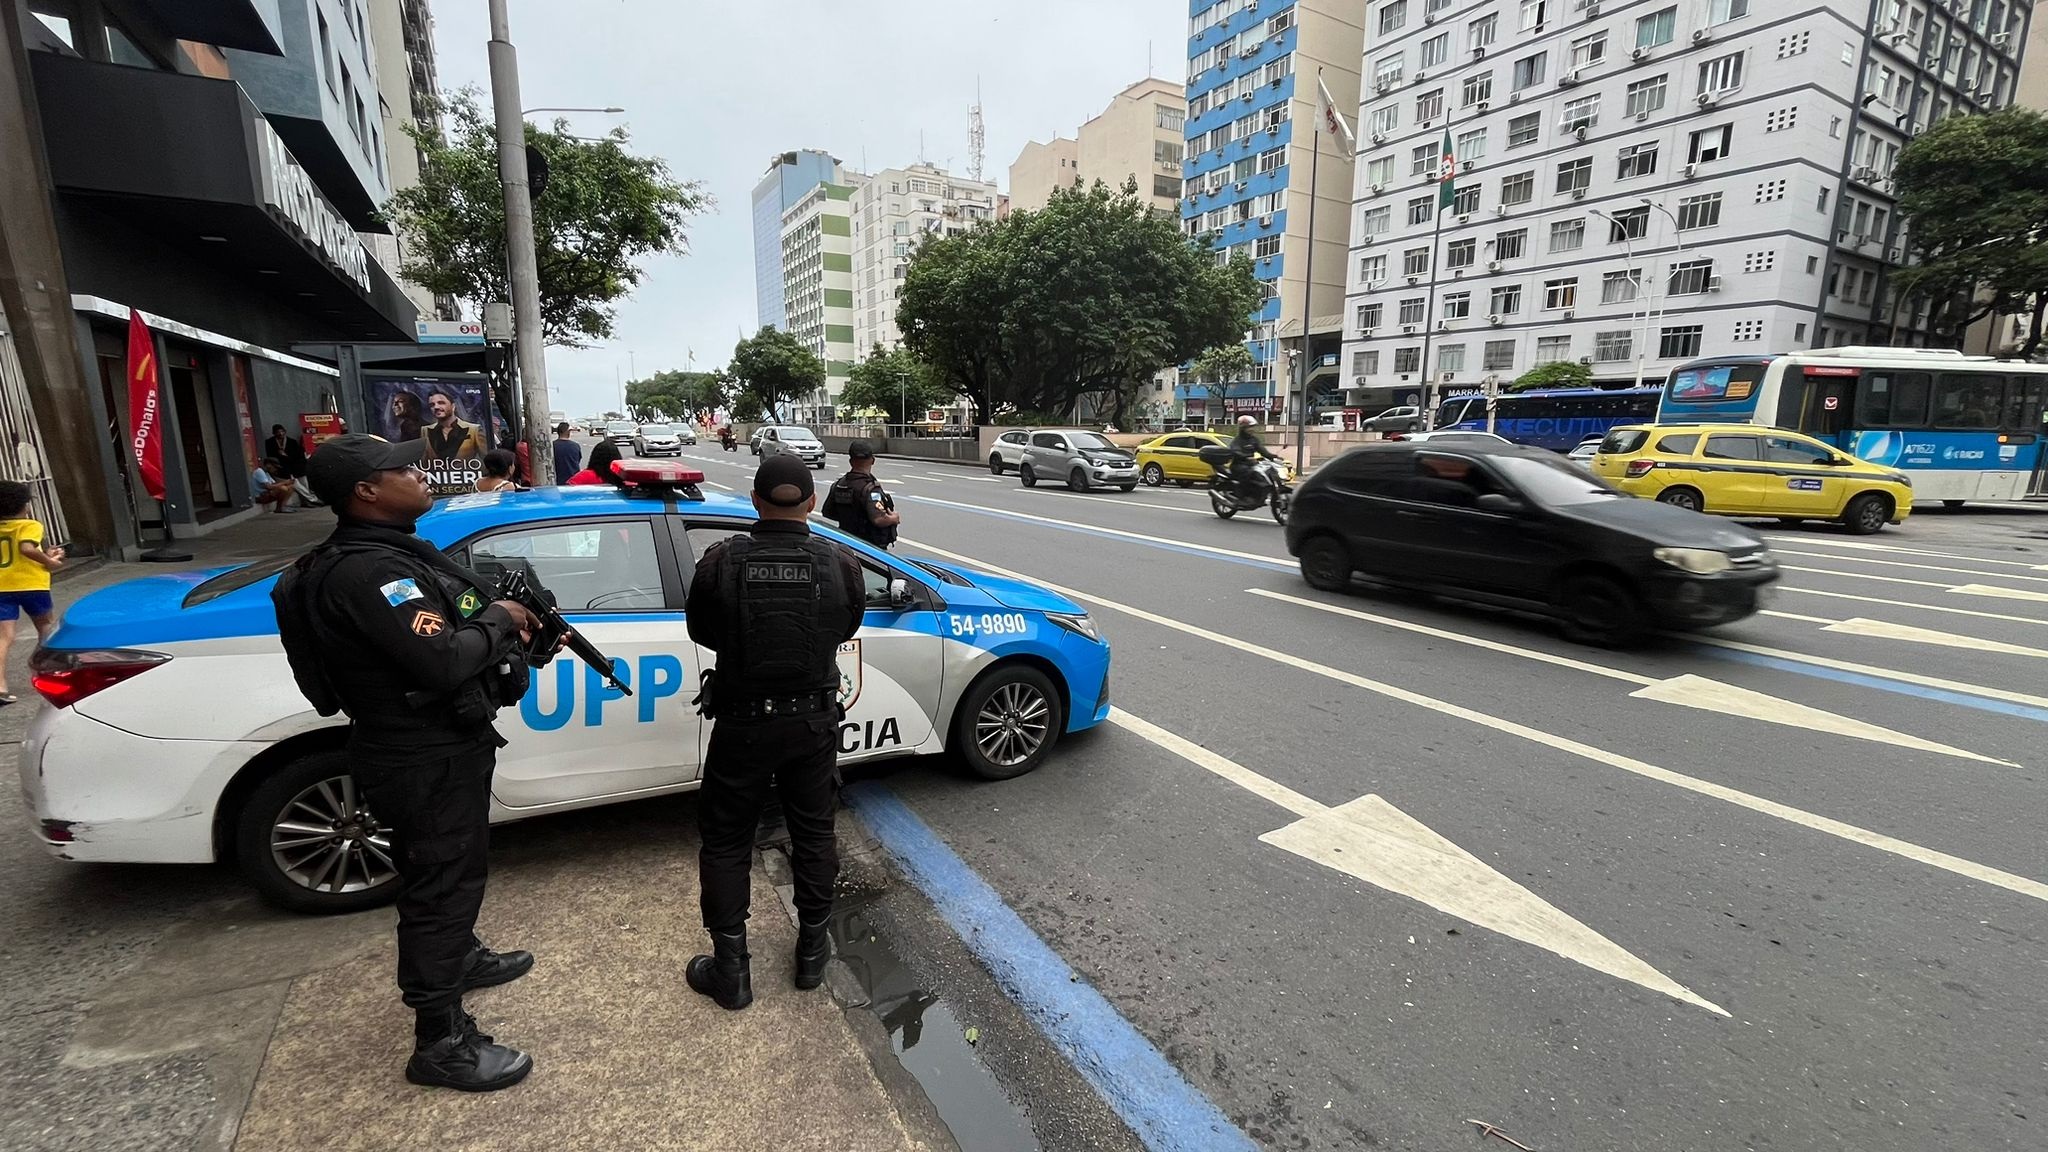 Police reinforce security on the streets of Copacabana (courtesy of PMERJ)